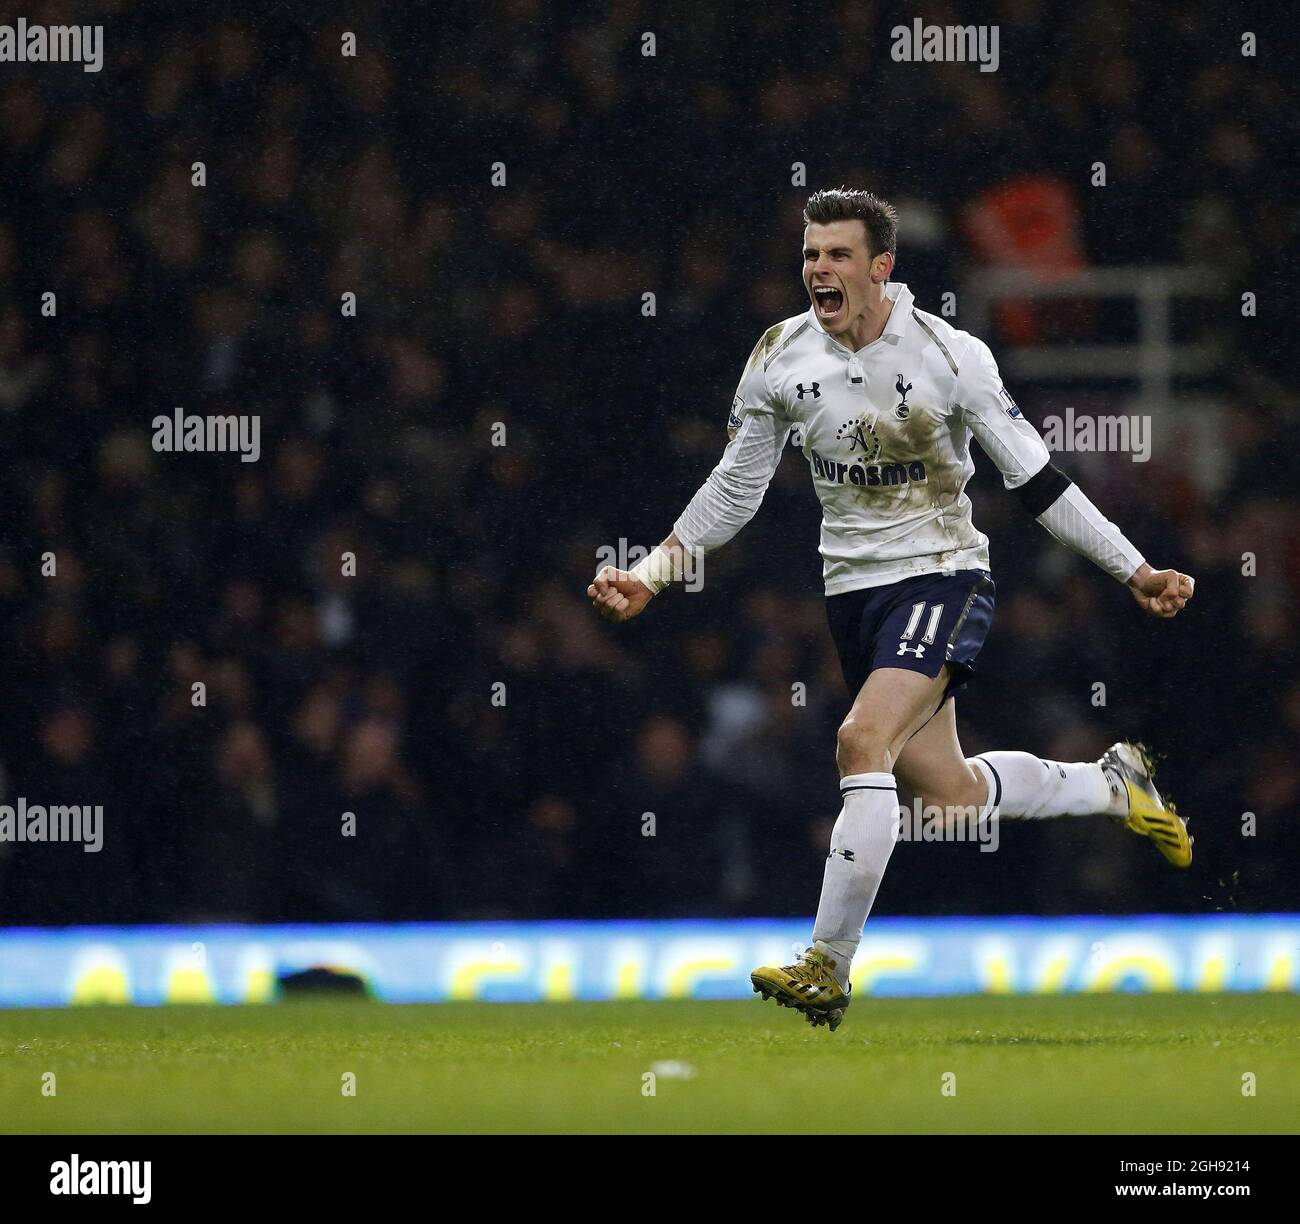 LONDON, March 3, 2013 (Xinhua) -- Gareth Bale of Tottenham Hotspur gestures  after the Barclays